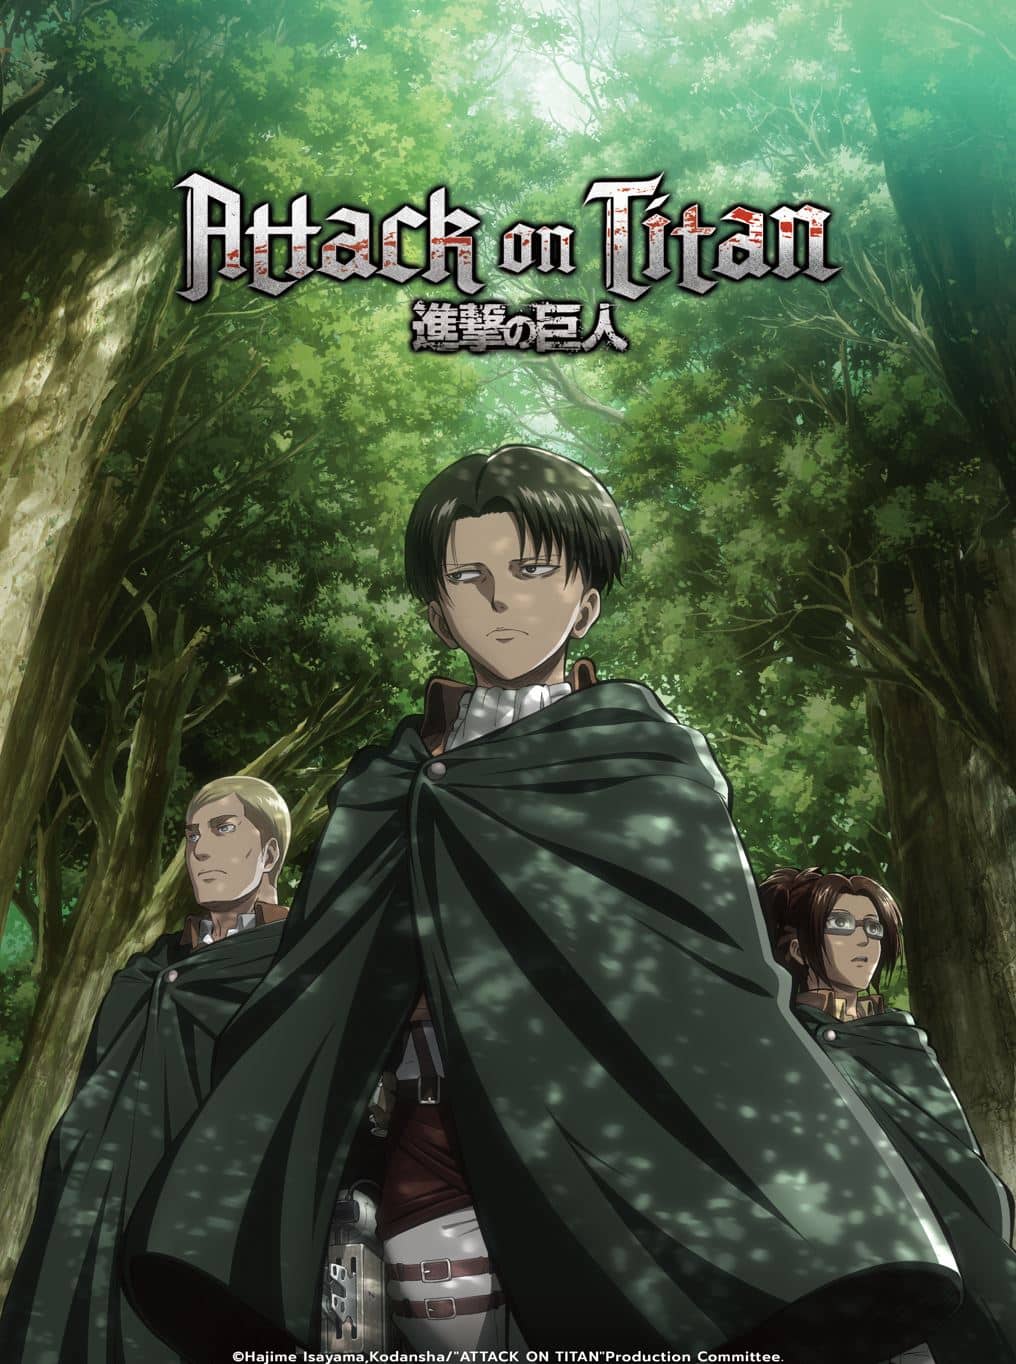 What were your thoughts on Attack on Titan Final Season Part 2's